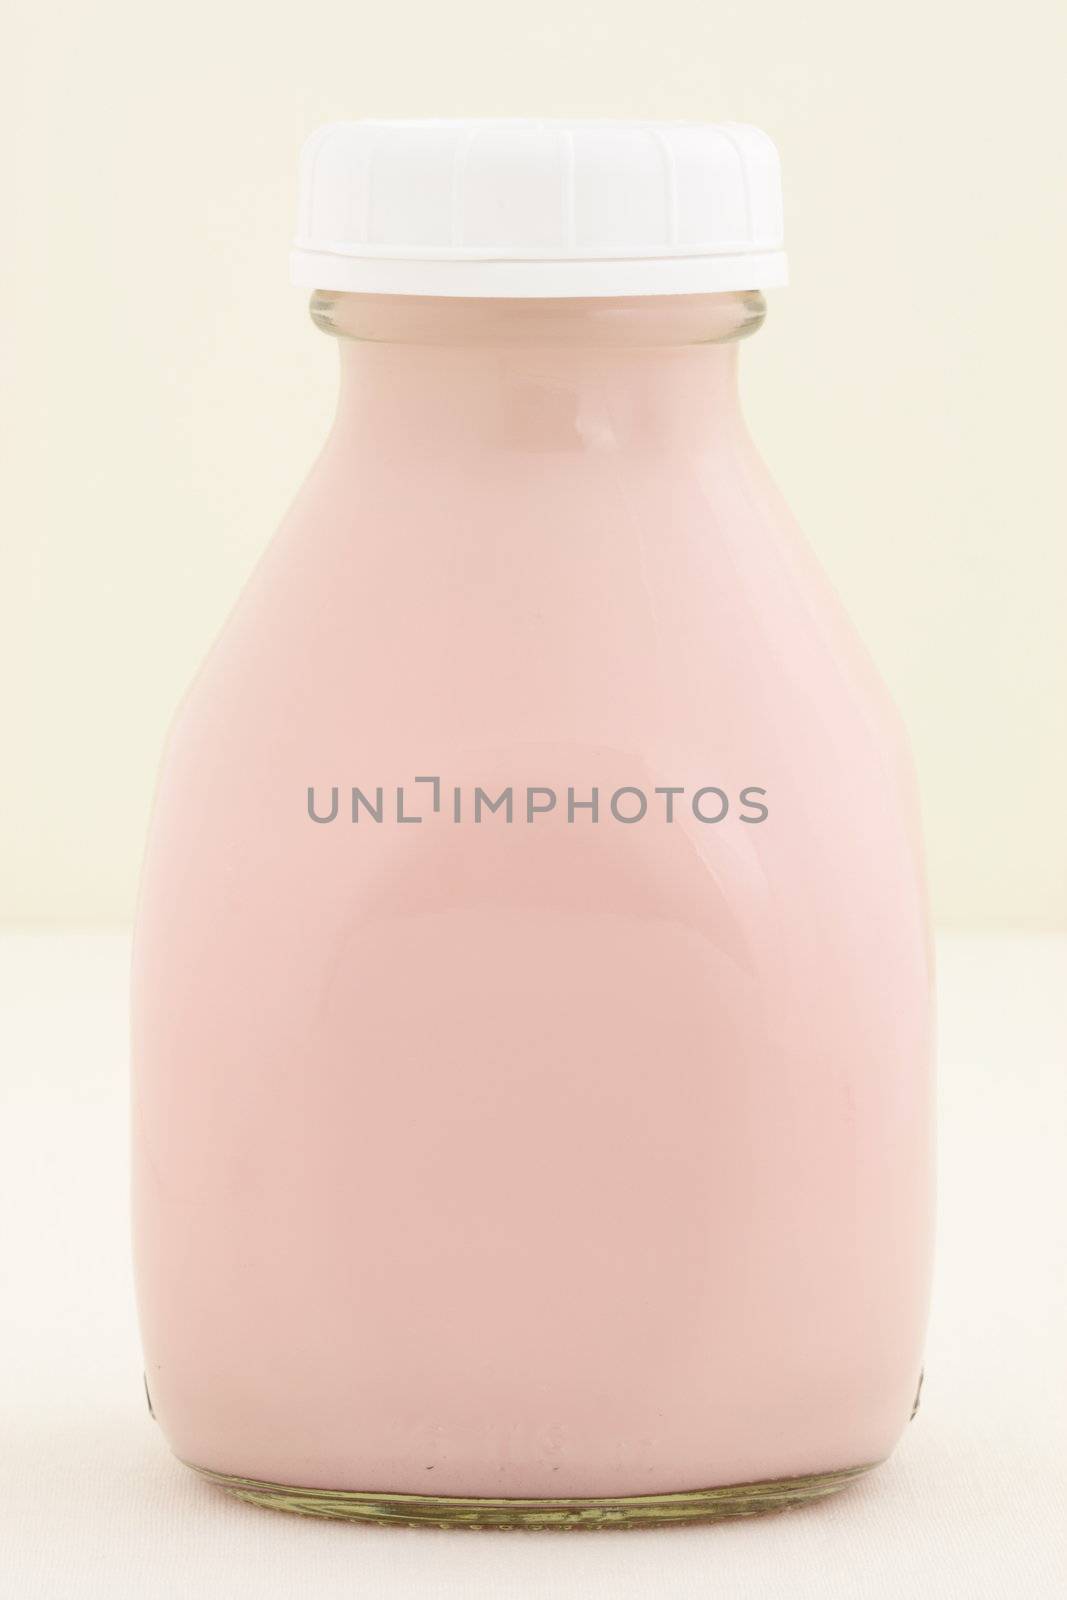 Delicious, nutritious and fresh Strawberry milk pint, made with organic real strawberry fruit 